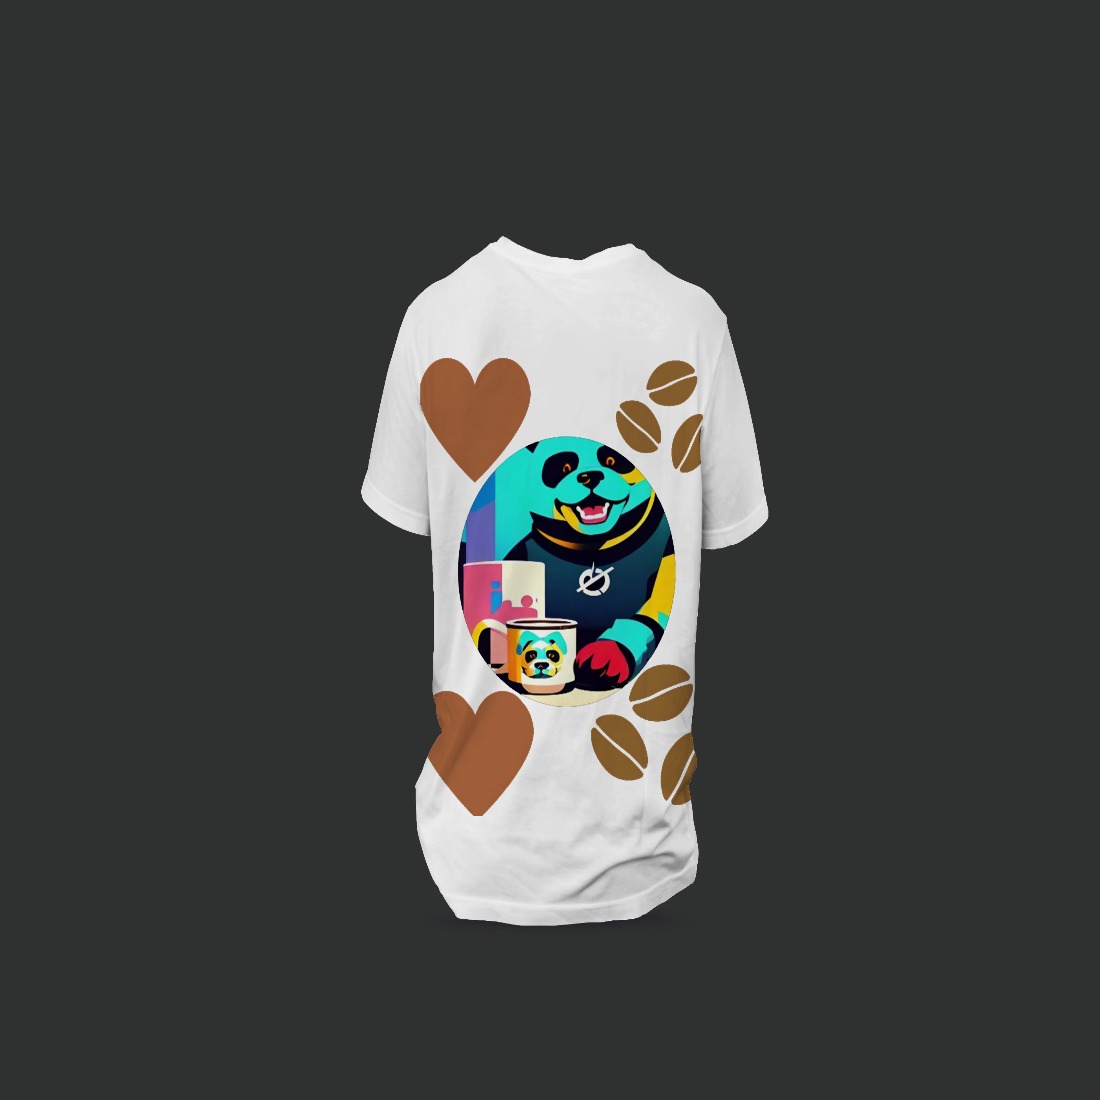 cute dog loves coffee - T-shirt design cover image.